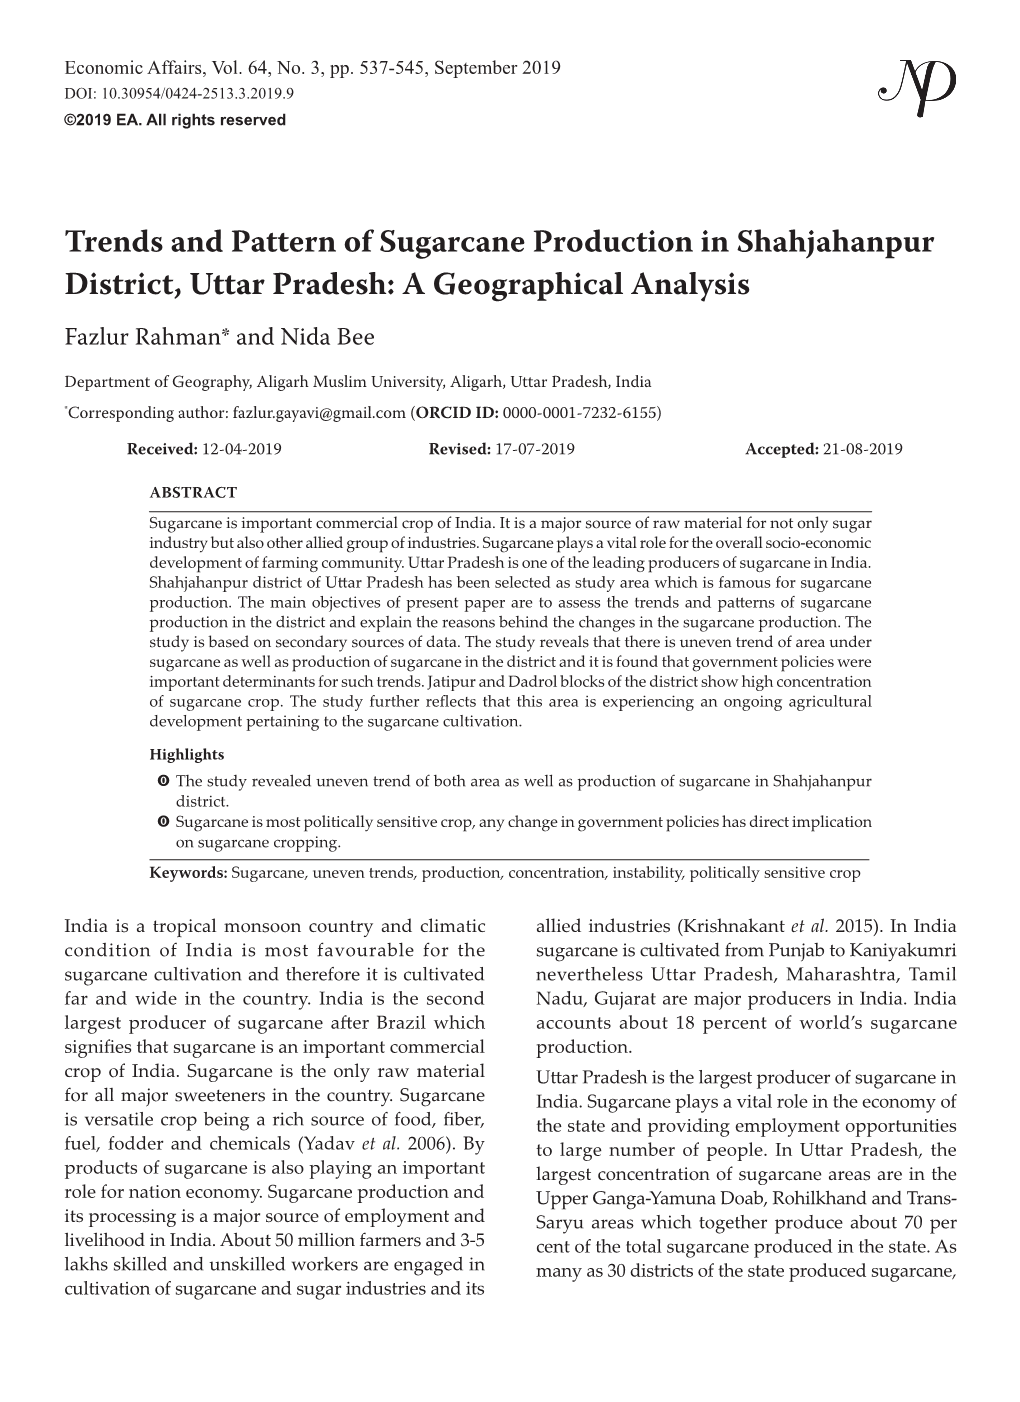 Trends and Pattern of Sugarcane Production in Shahjahanpur District, Uttar Pradesh: a Geographical Analysis Fazlur Rahman* and Nida Bee